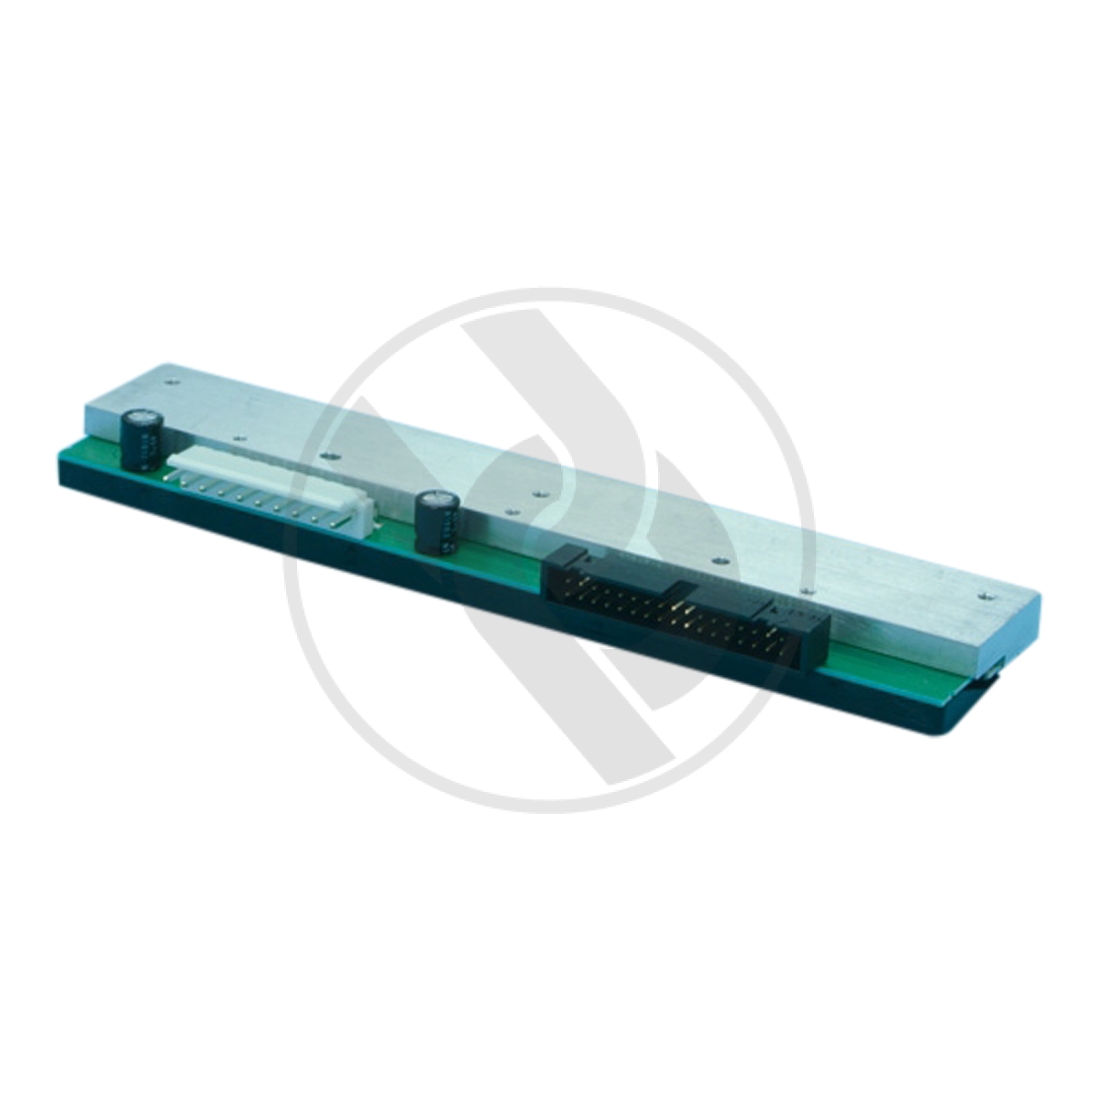 Thermal printhead, 533640, for Imaje-Markpoint 533640